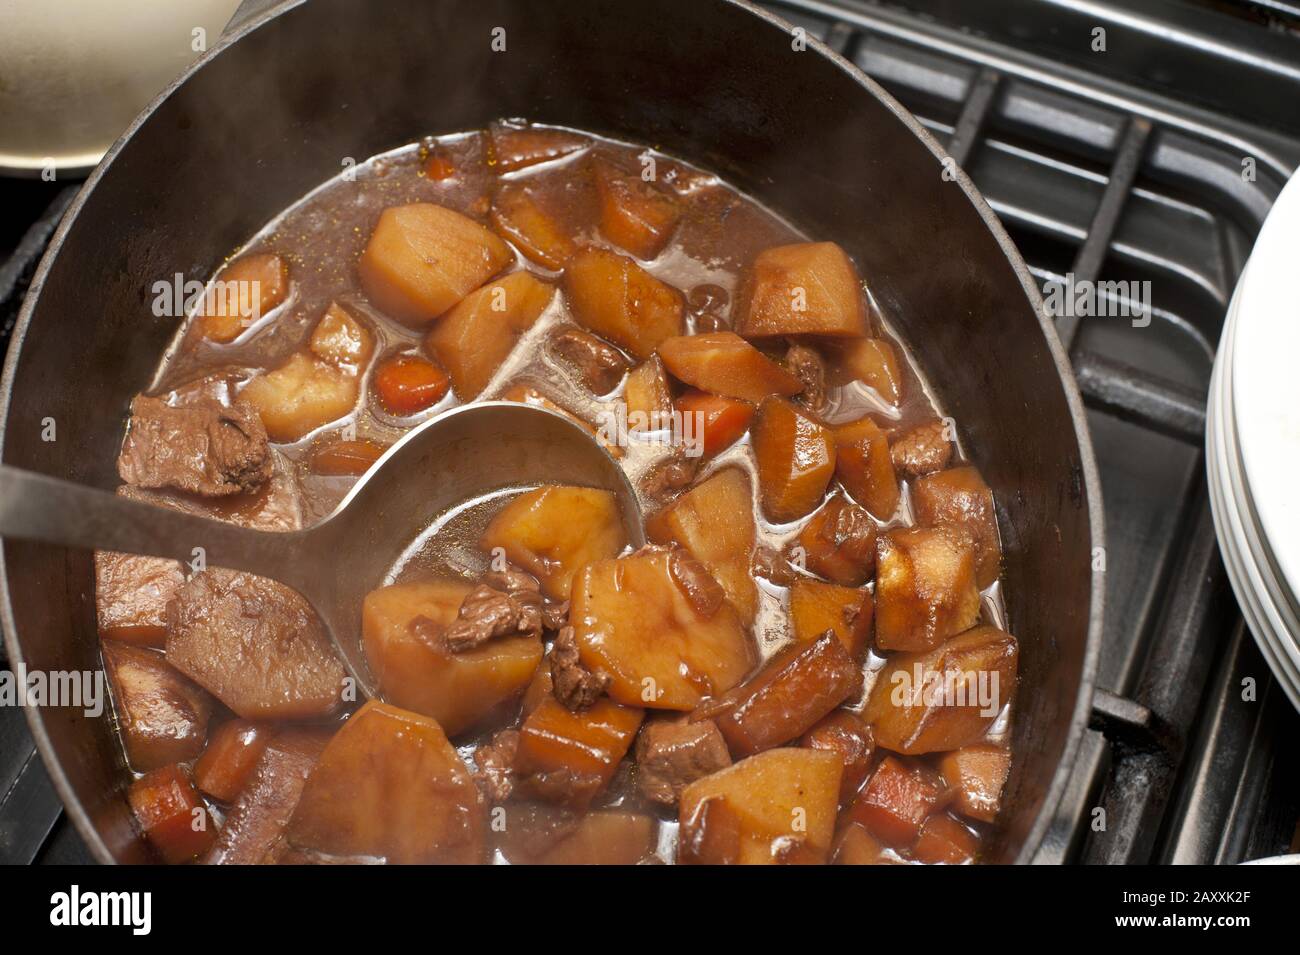 Delicious hot soup or stew with potatoes, meat, different vegetables in saucepan on stove. From above Stock Photo